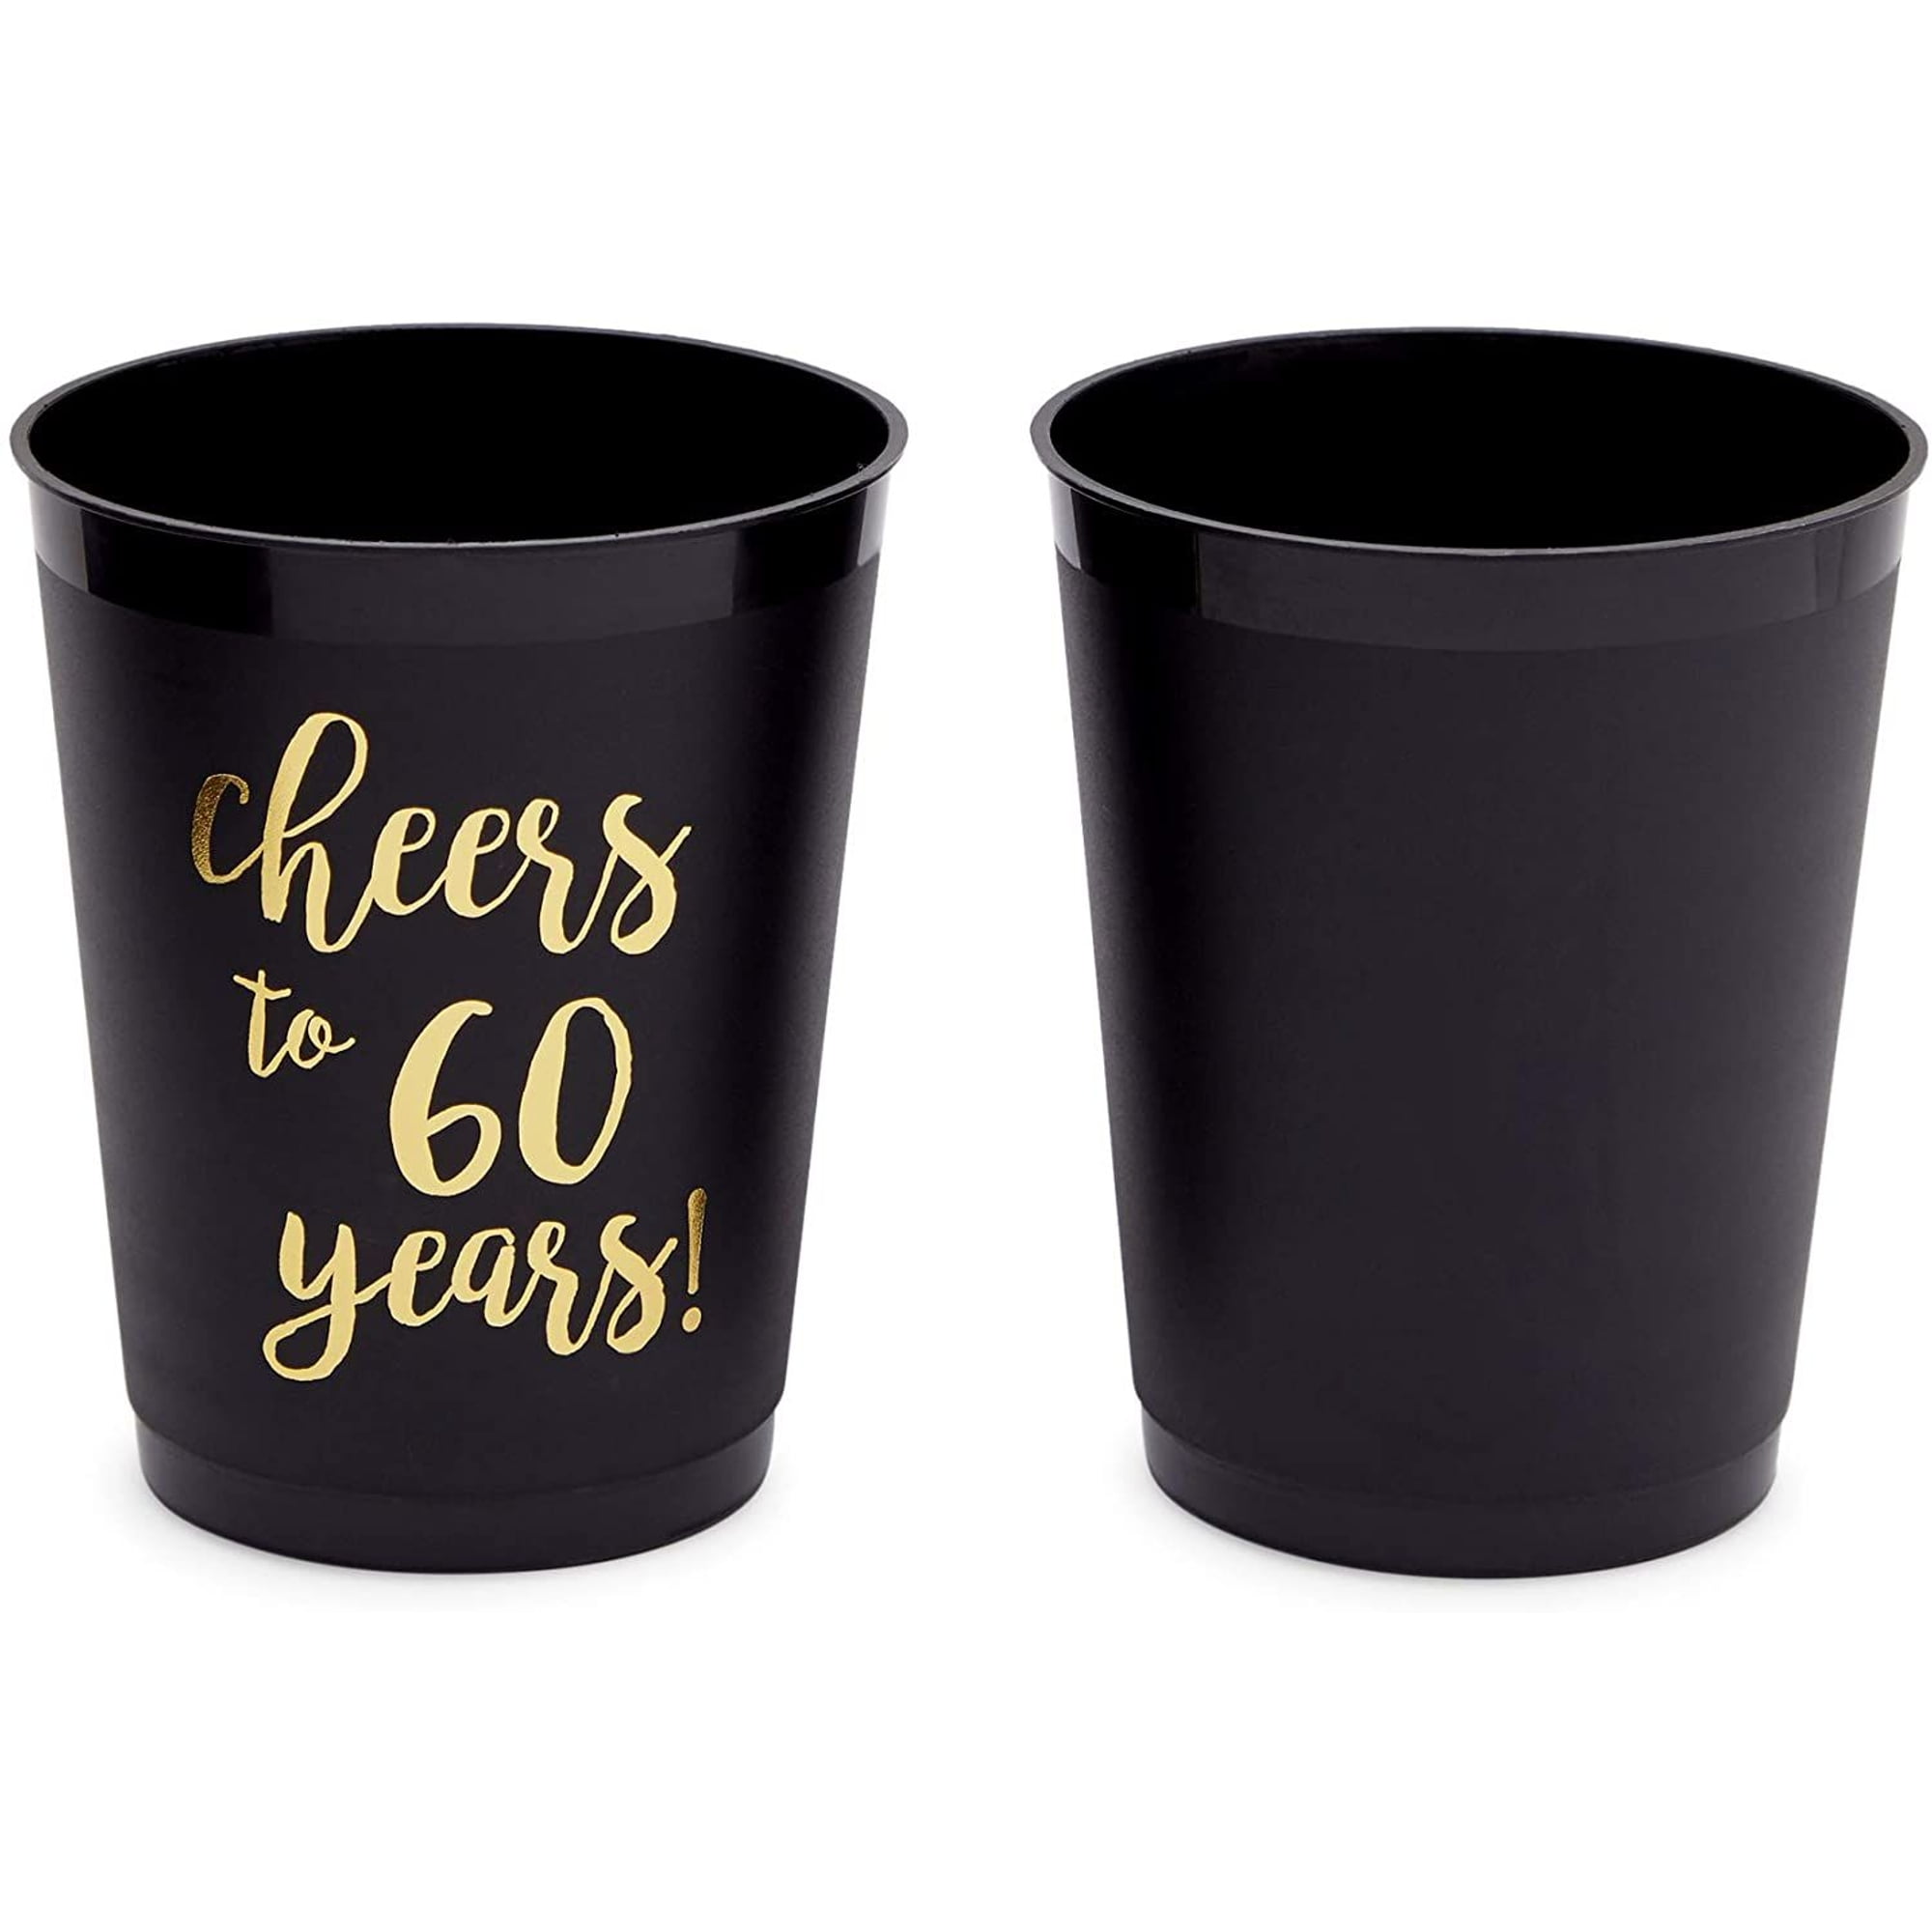 Cheers To Another Year Tumbler - Birthday Tumbler - 40th 50th 60th